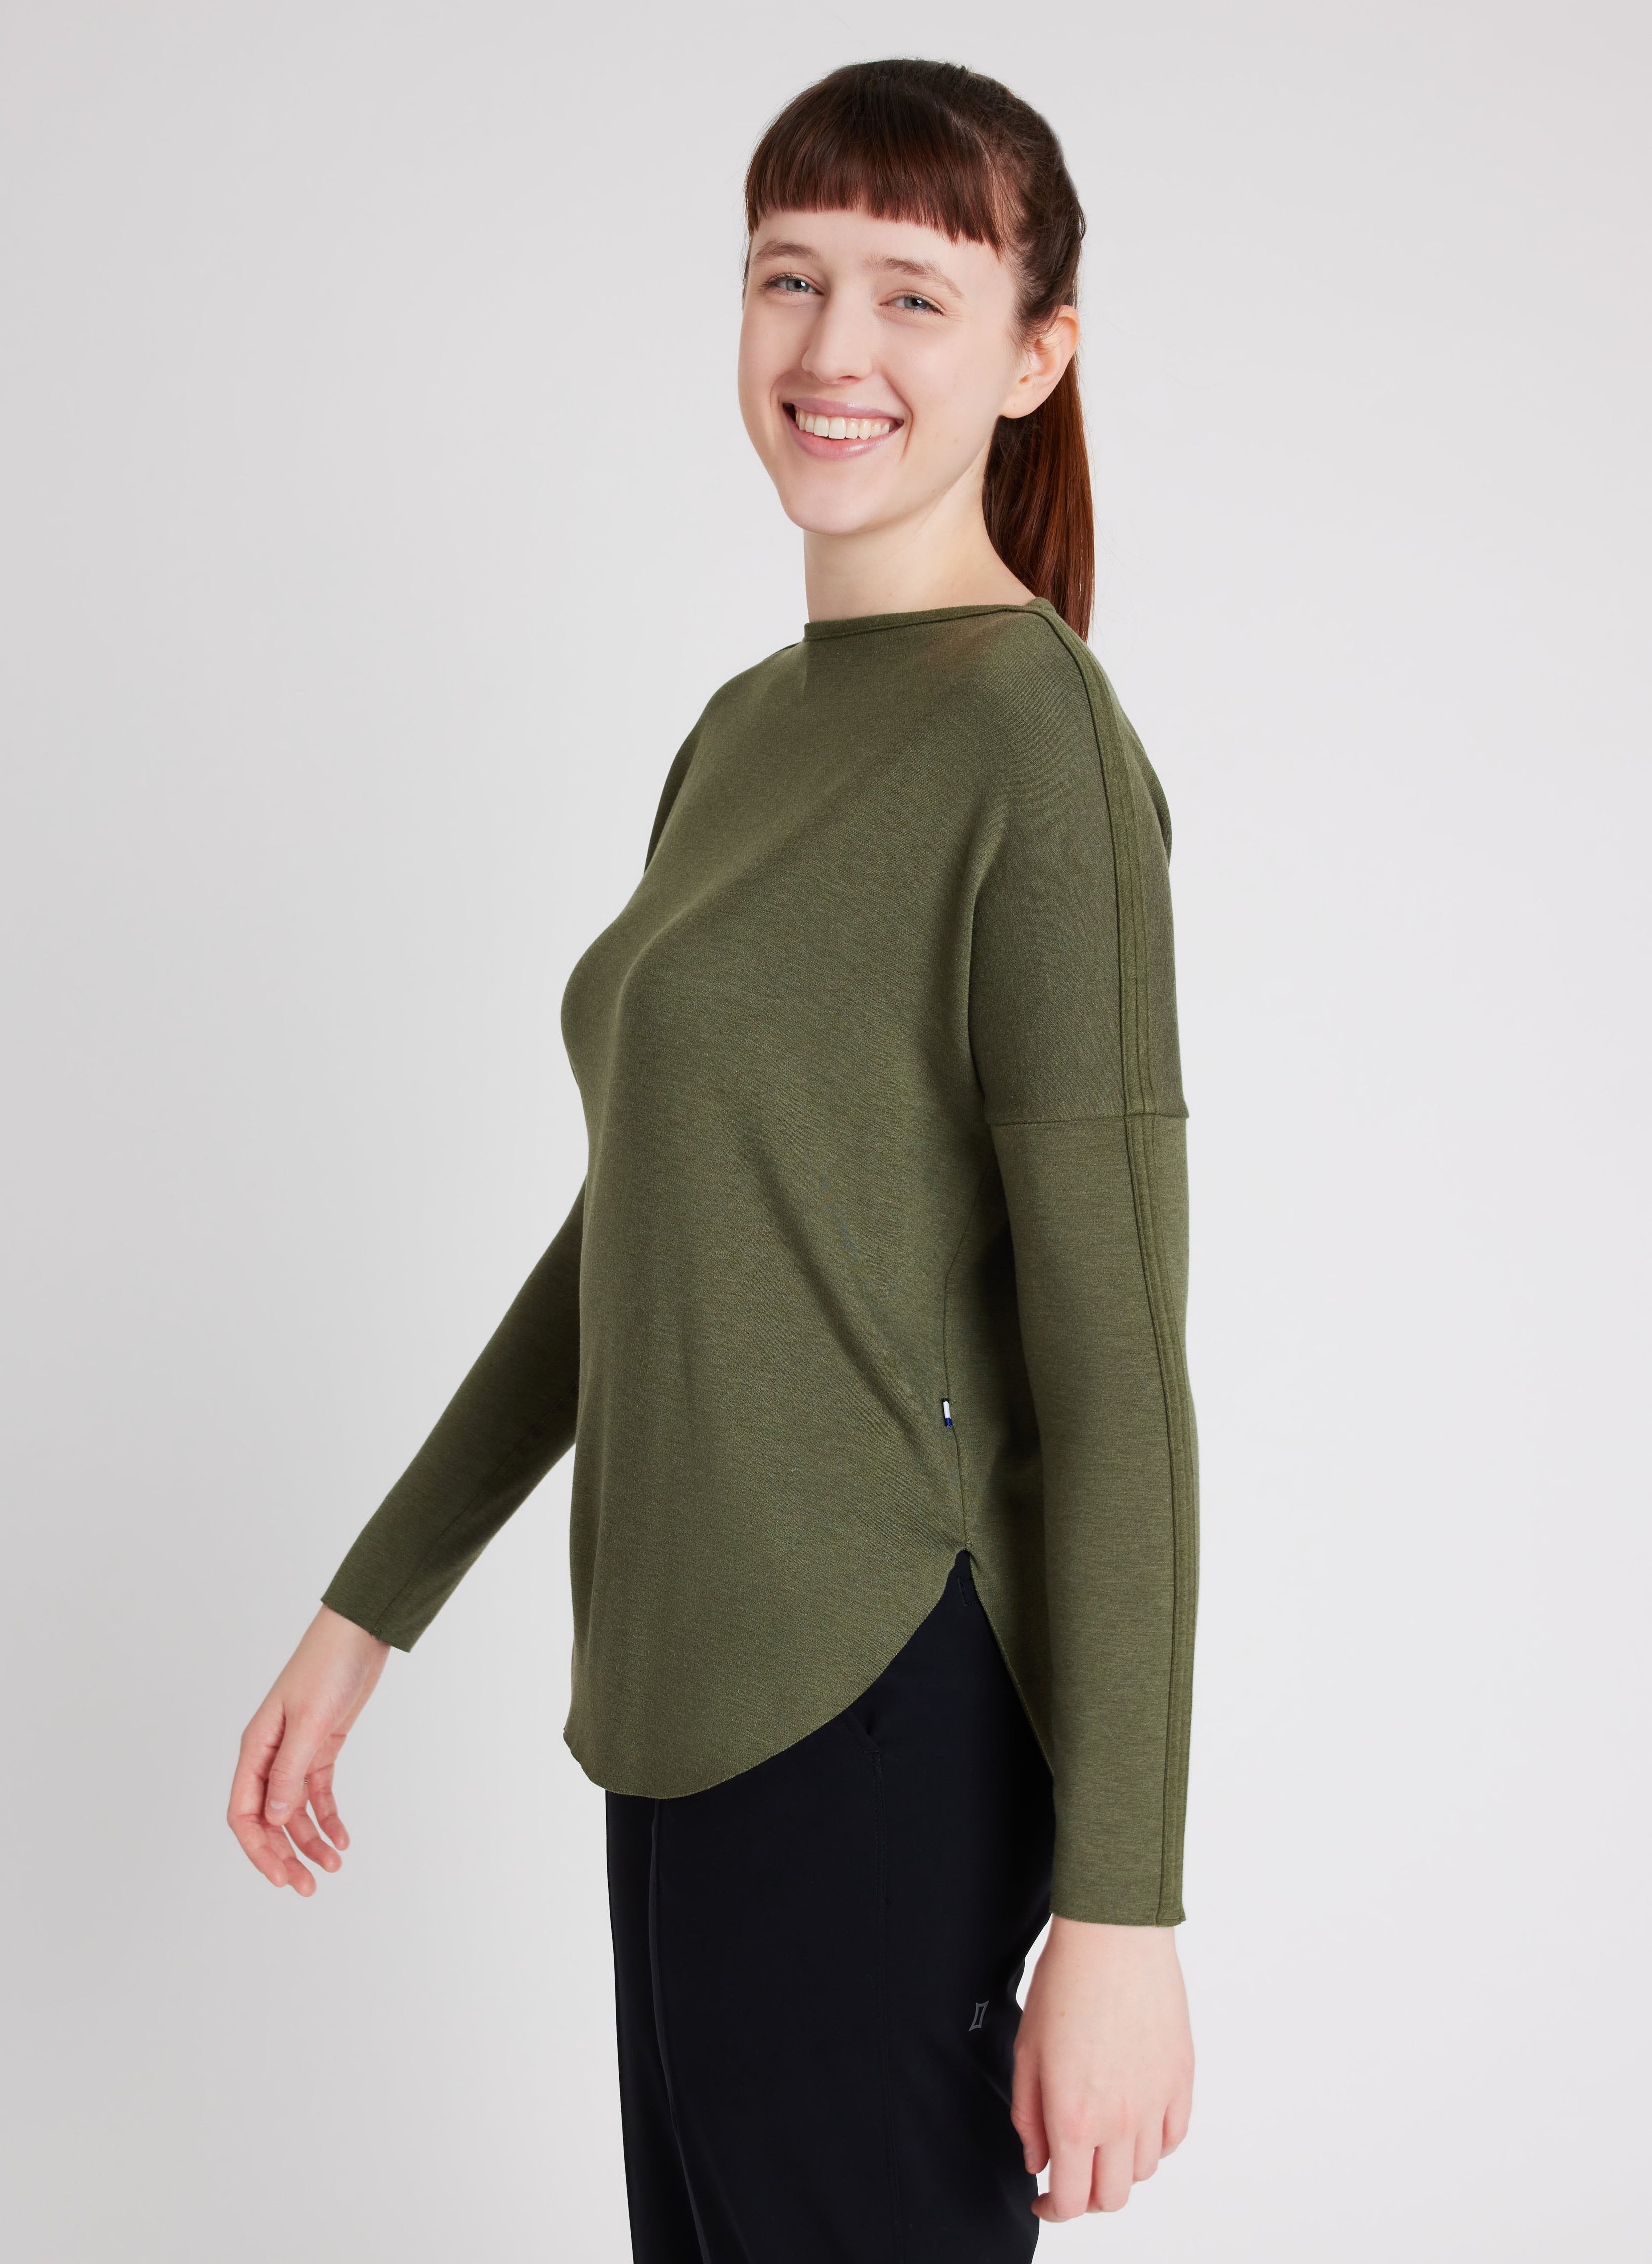 Kit and Ace — Burrow Pullover